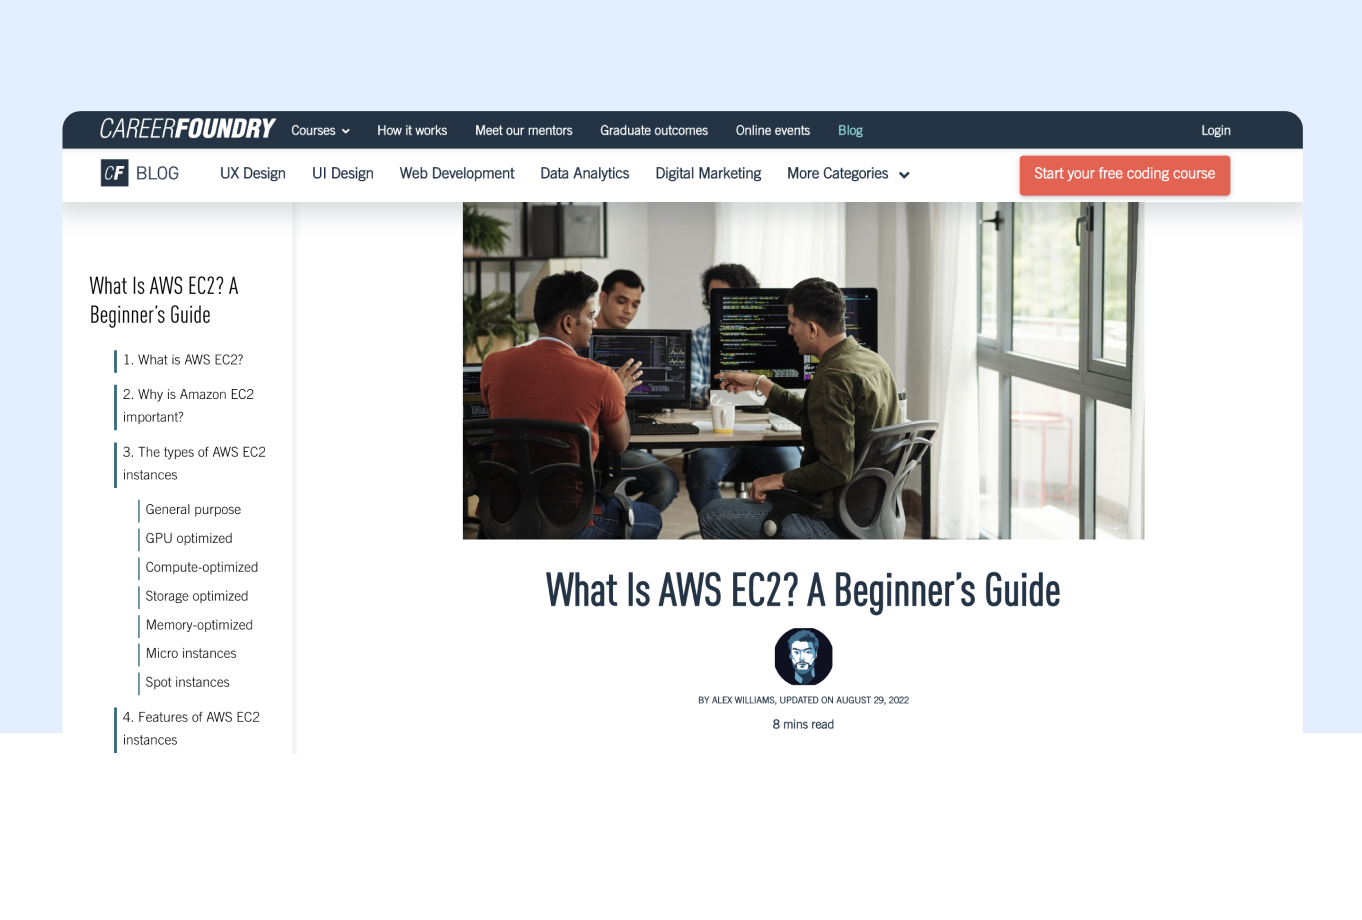 What is AWS EC2? A Beginner's Guide